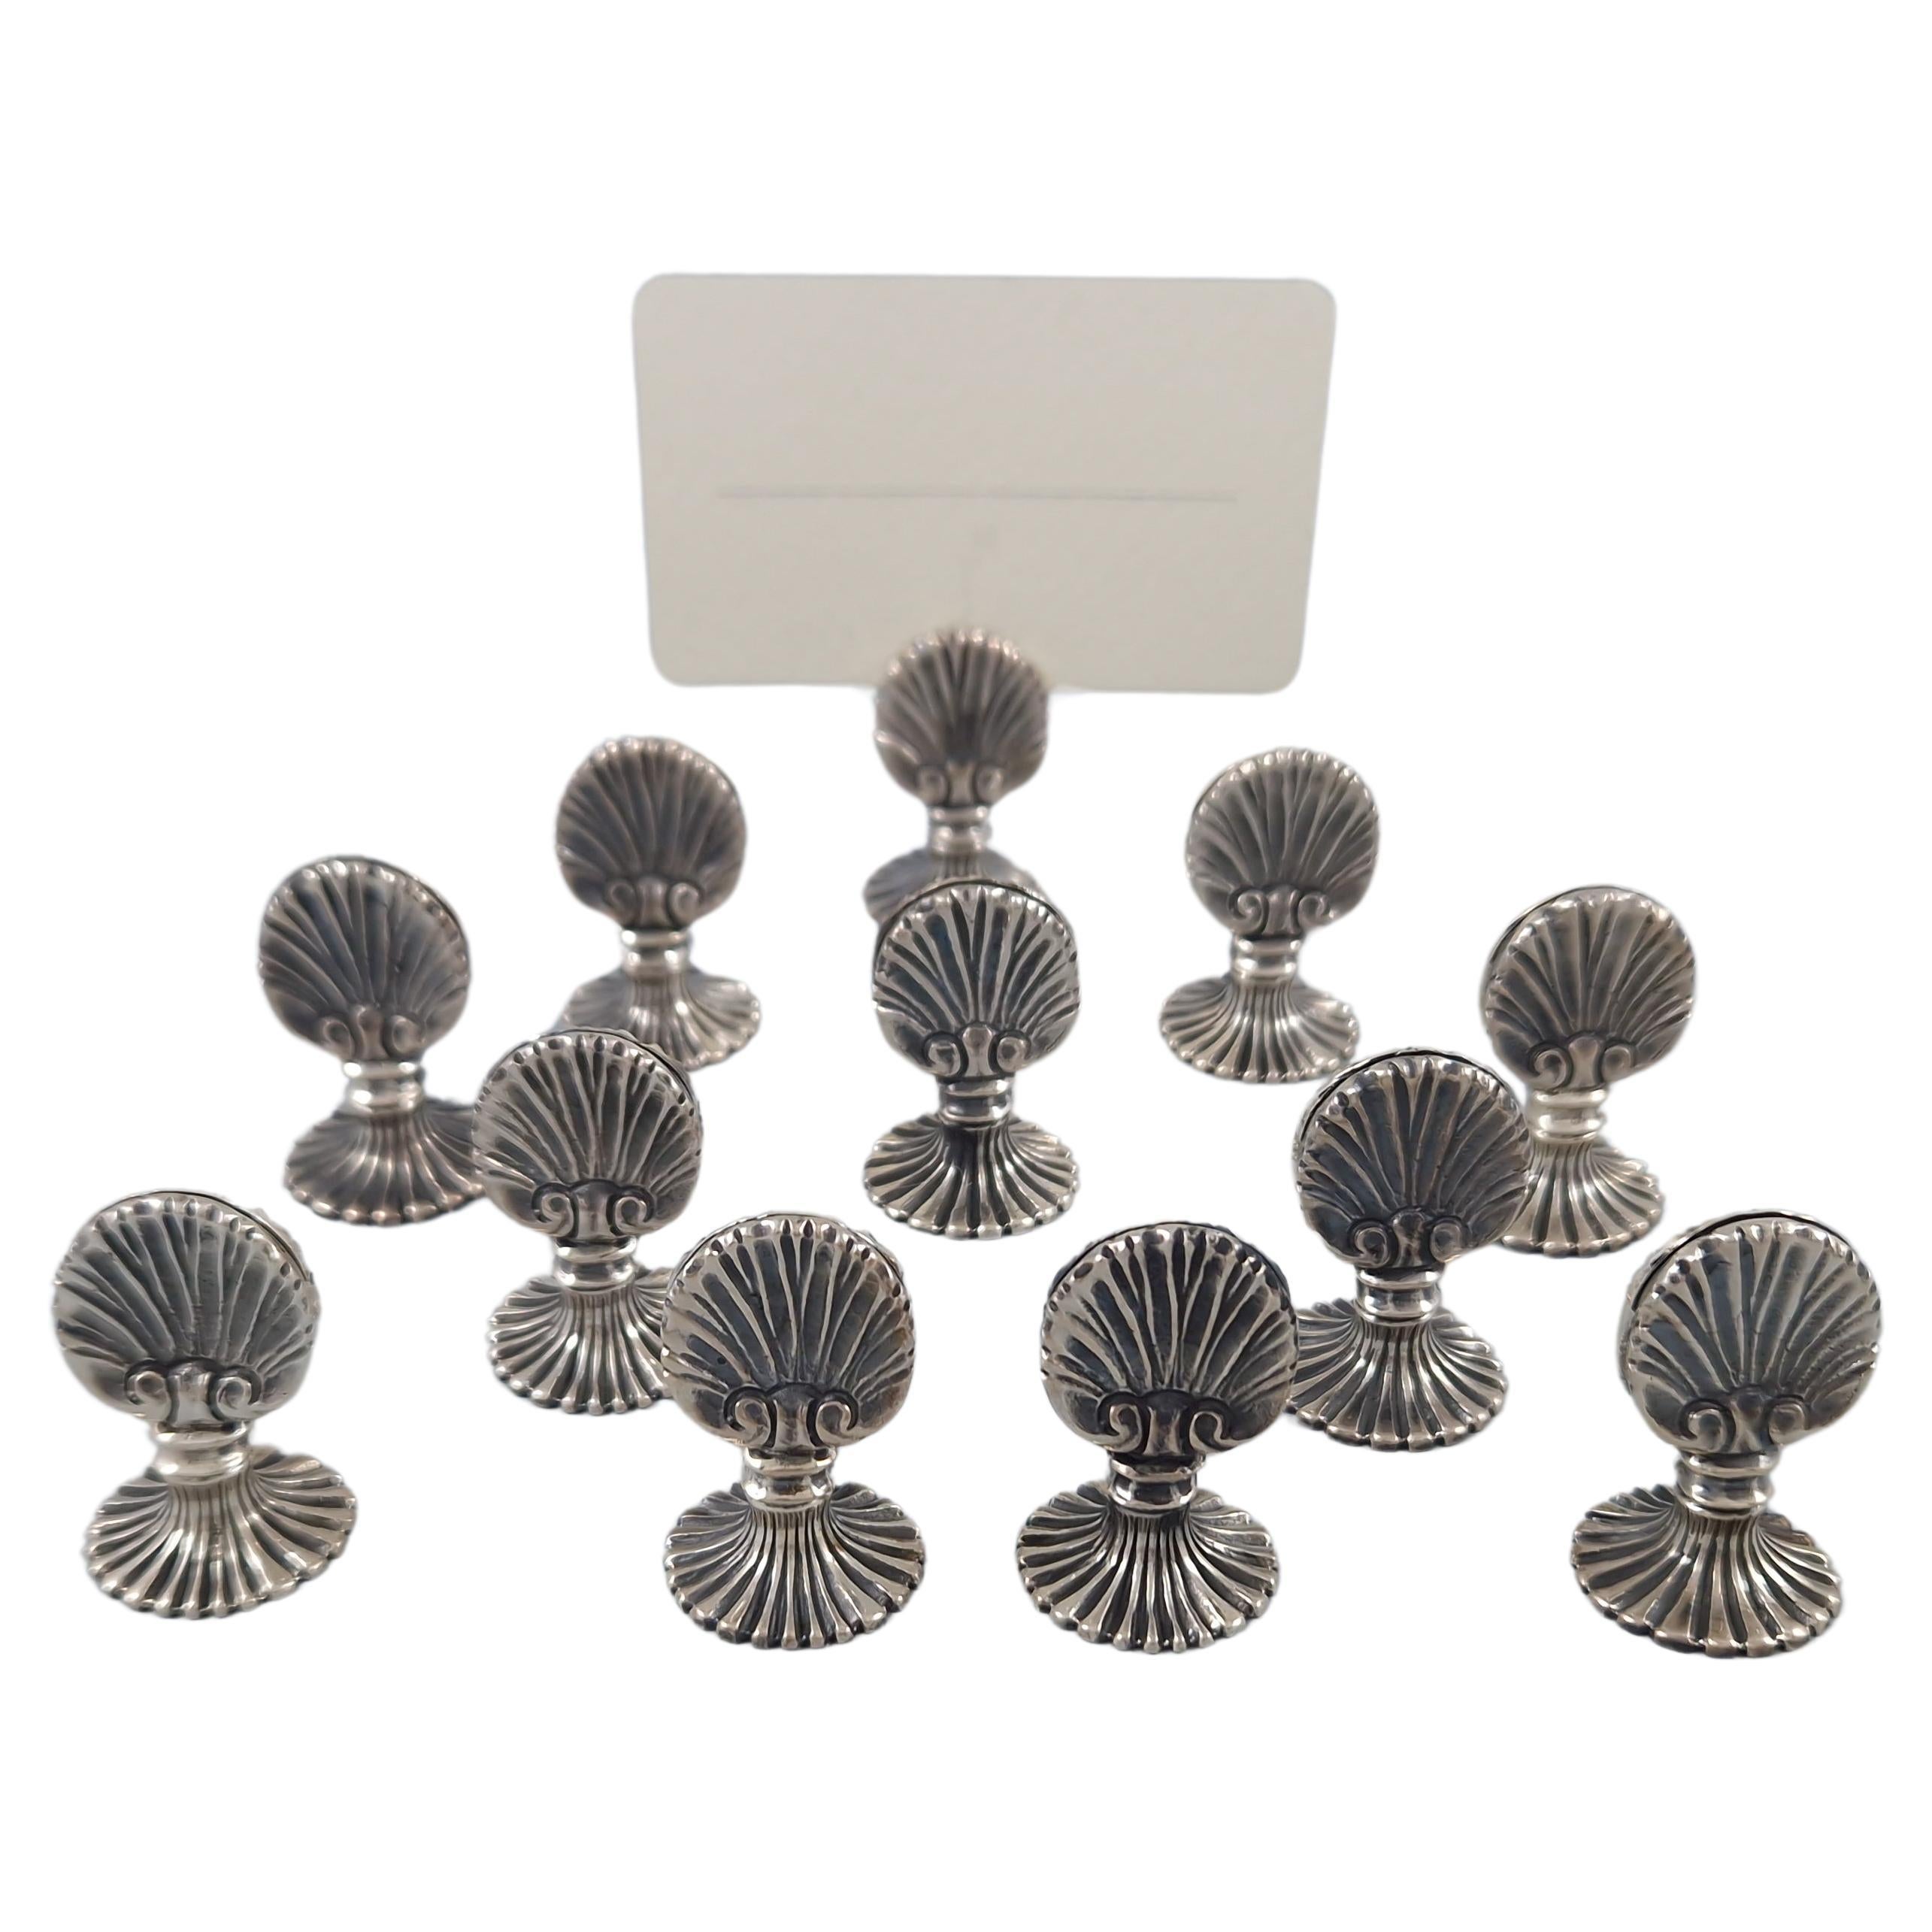 Buccellati - 12 Sterling Silver Place Card Holders